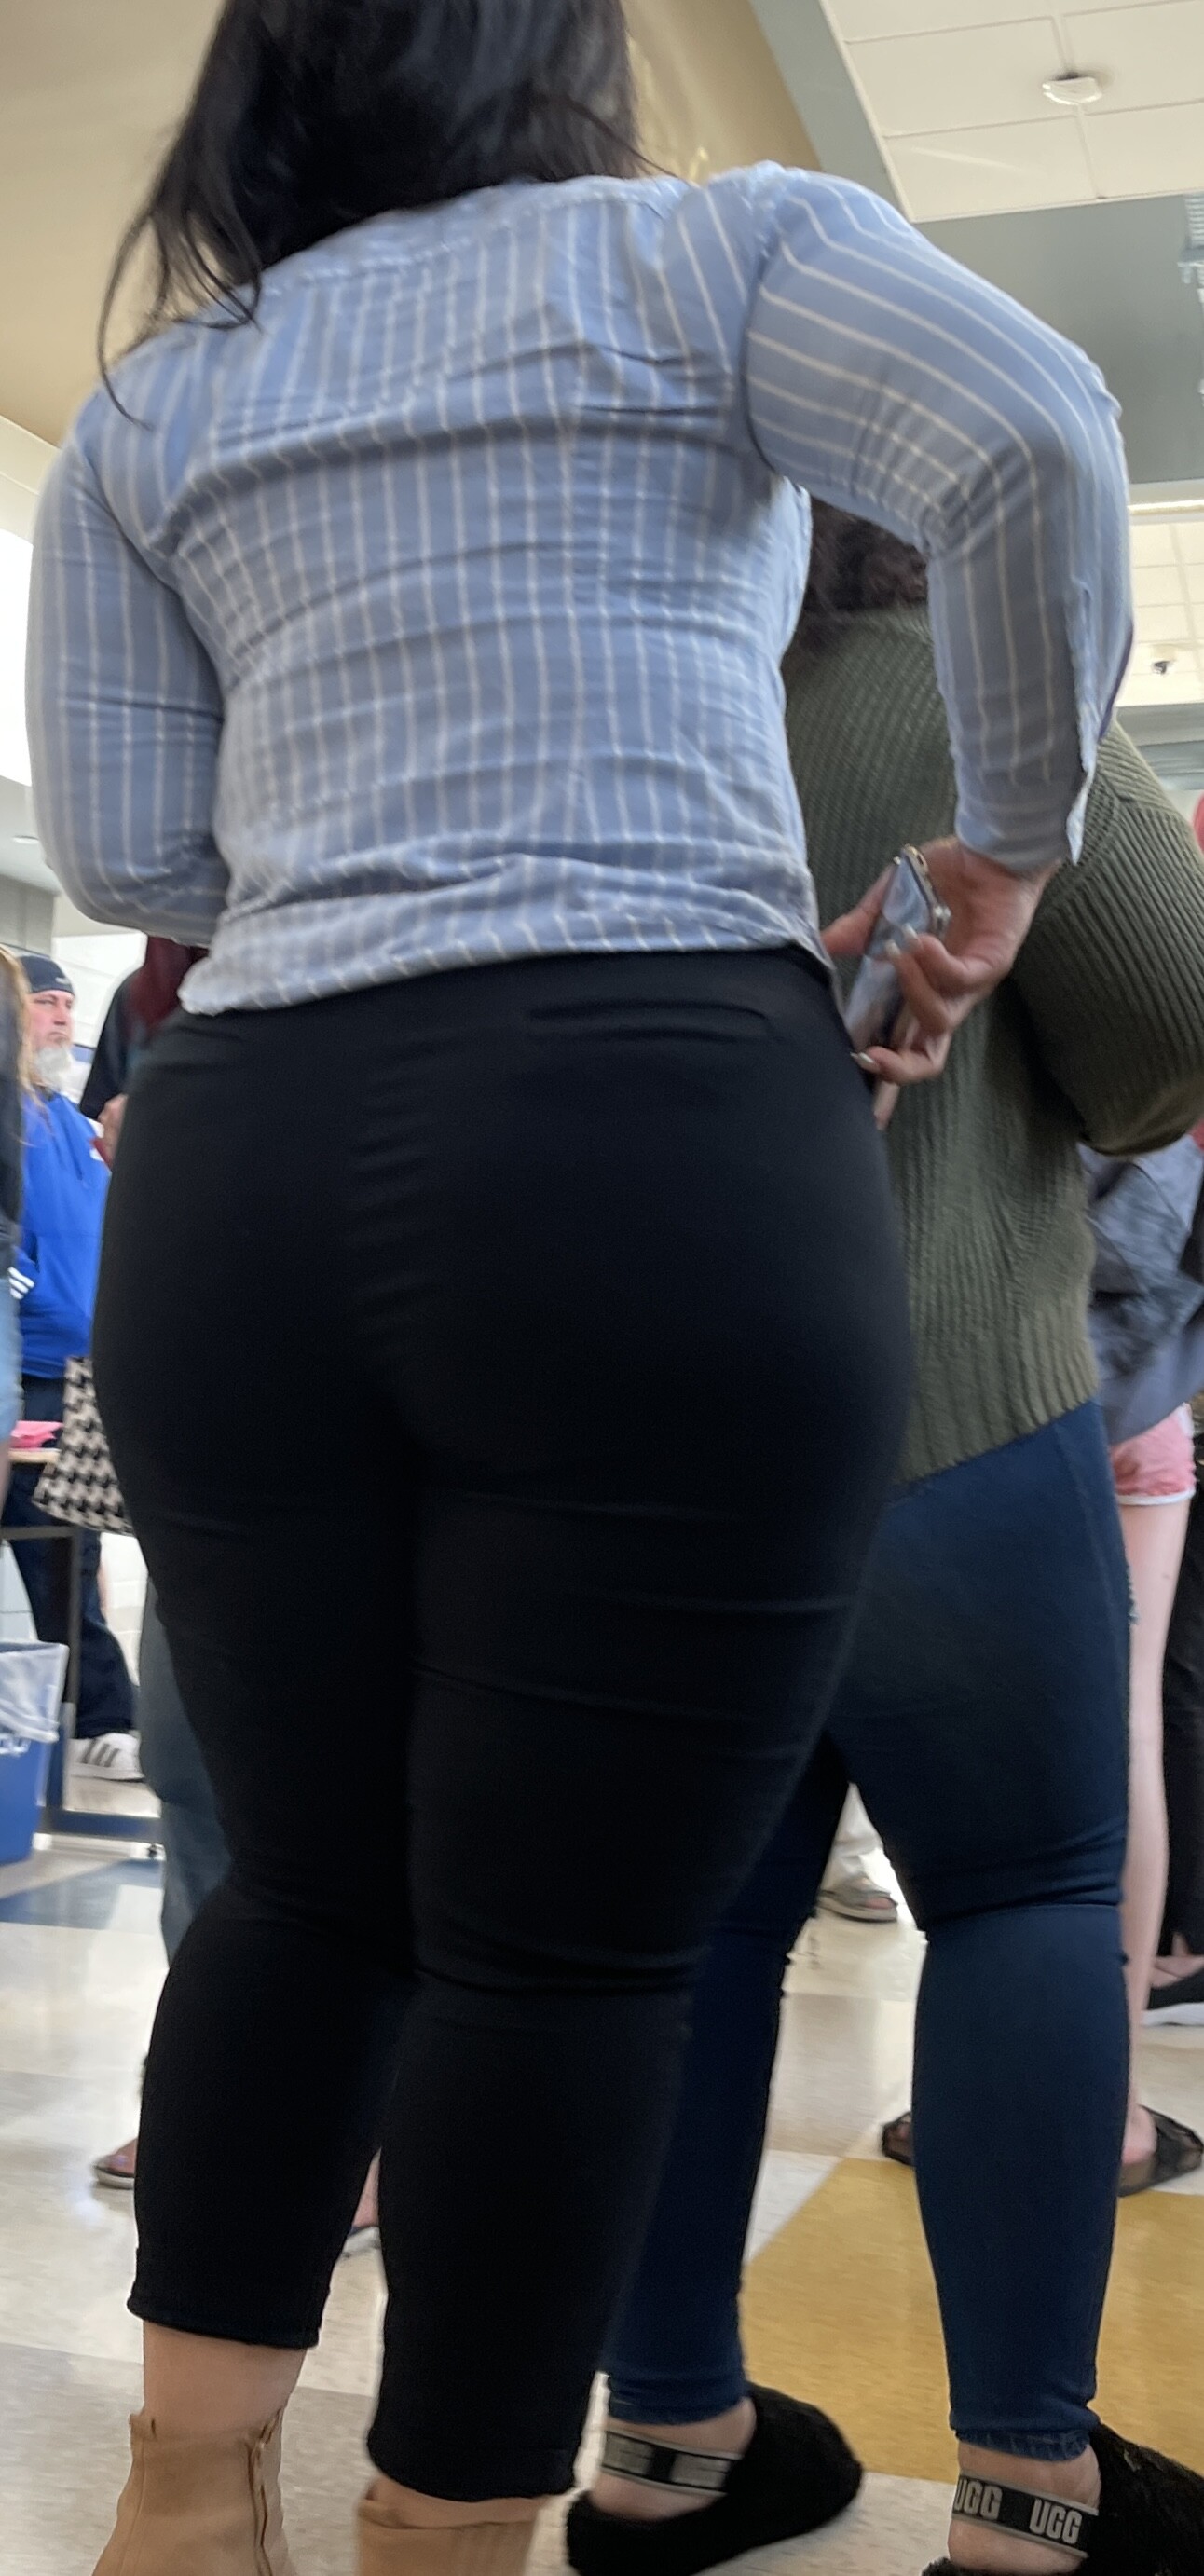 Monster Booty On a Beauty! - Tight Jeans - Forum